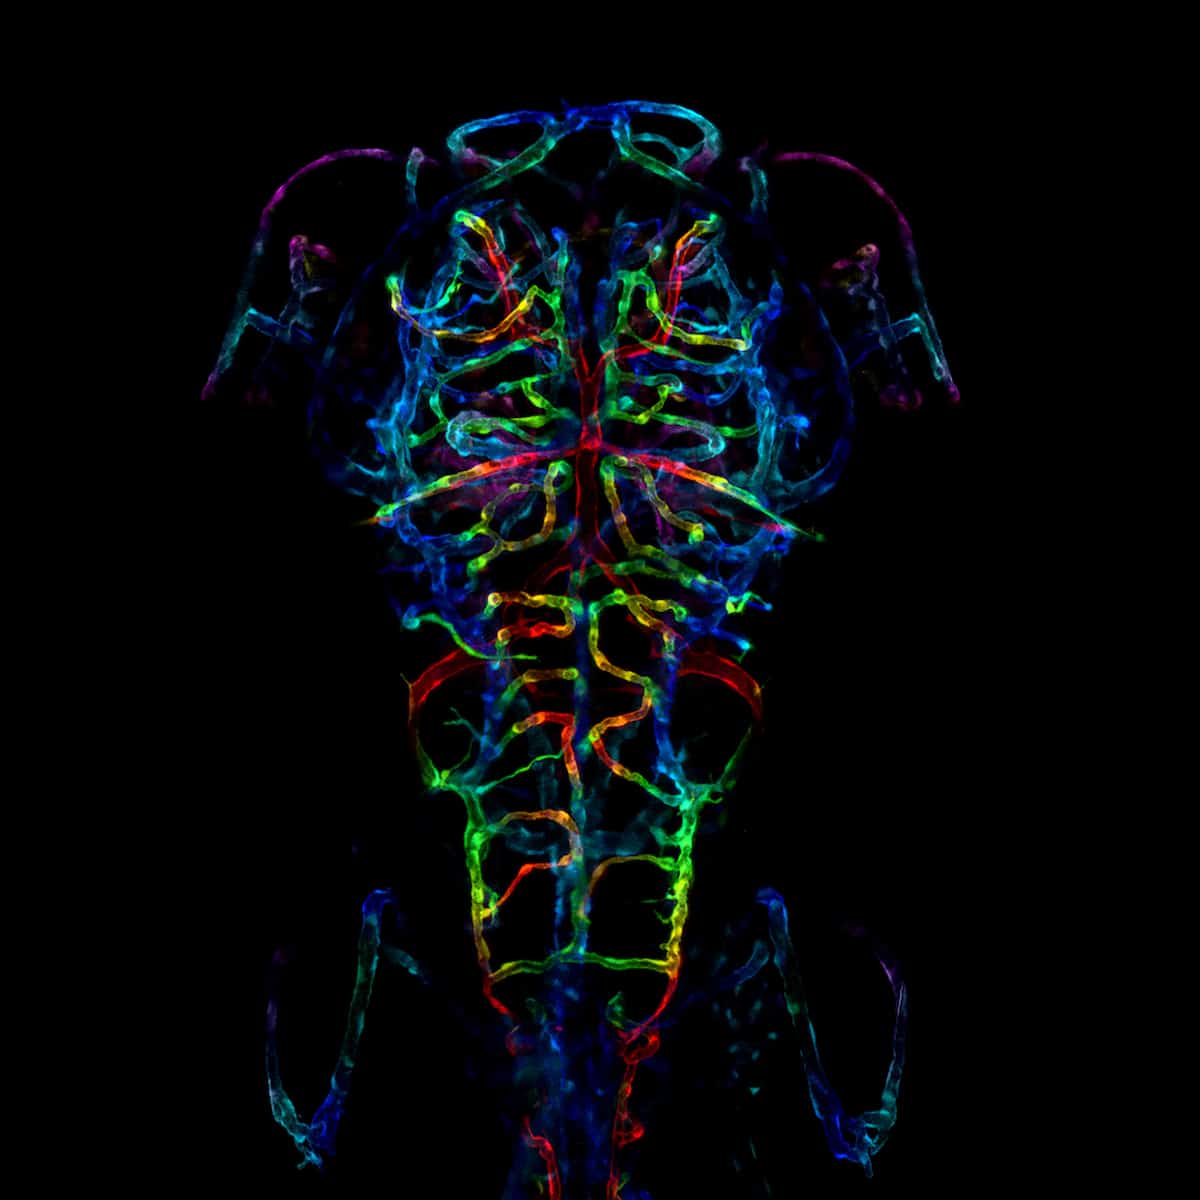 Colored Coded Image of the developing nervous system of an embryonic zebrafish